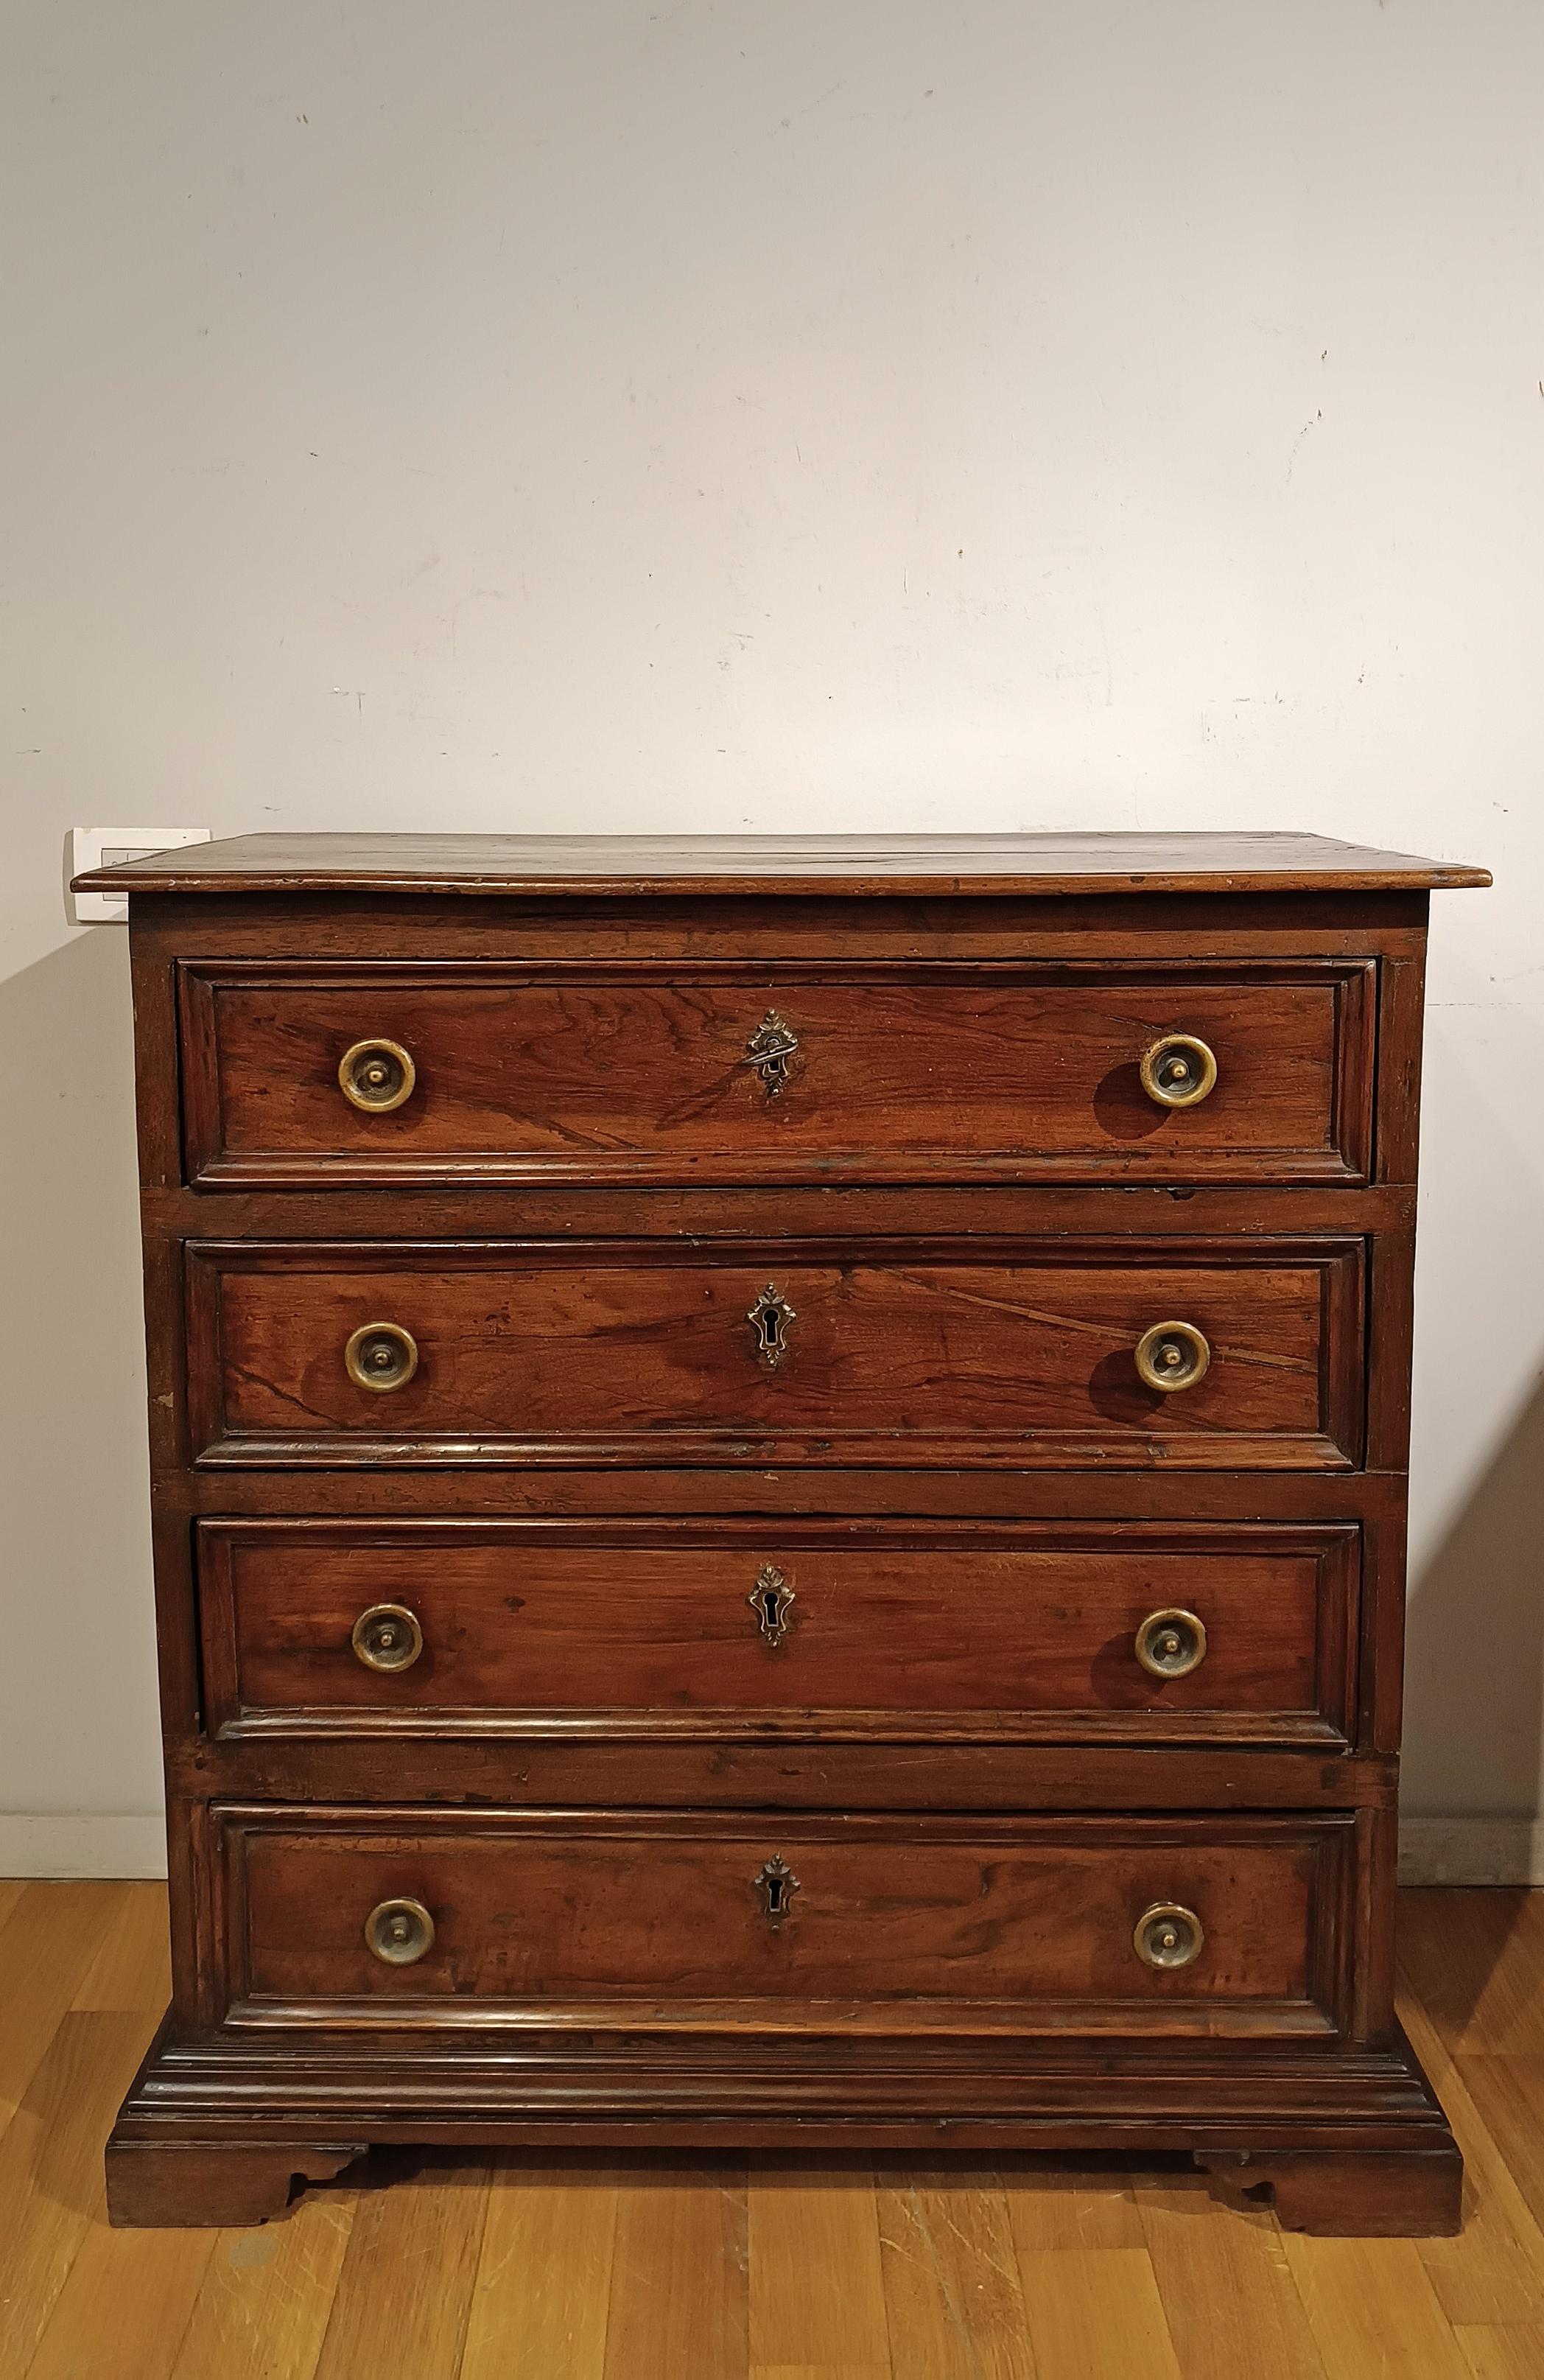 17th CENTURY CHEST OF DRAWERS IN SOLID AND VENEREED WALNUT 10